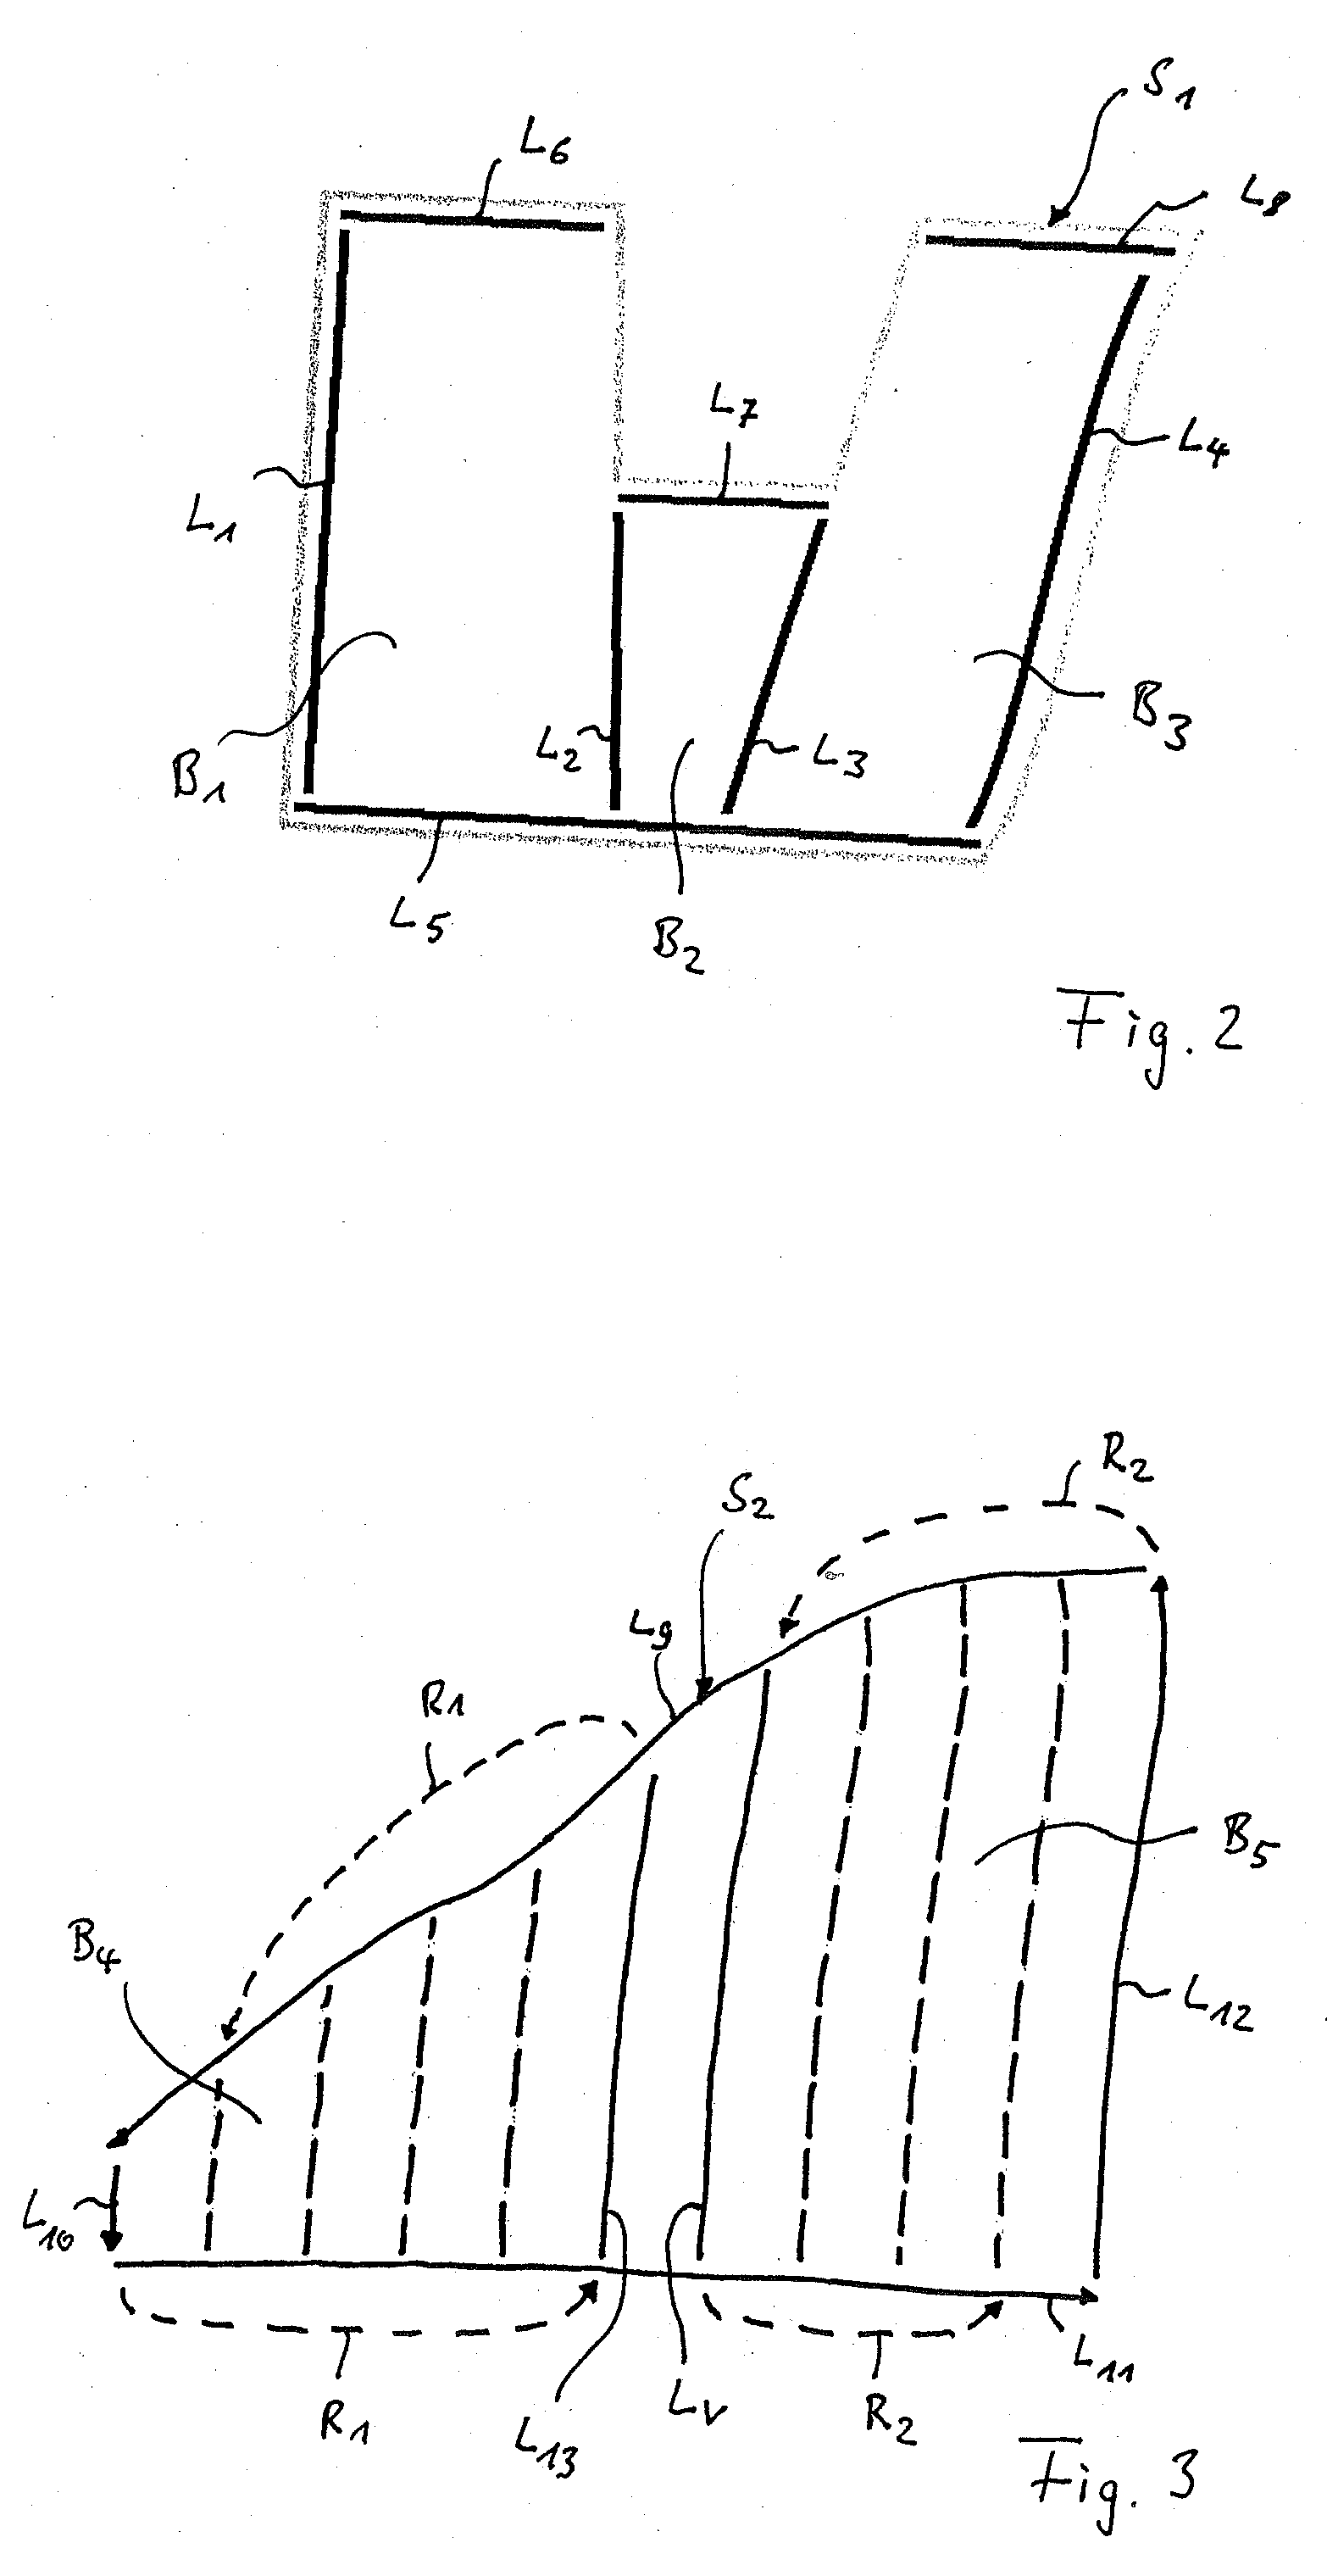 Method for creating a route plan for agricultural machine systems